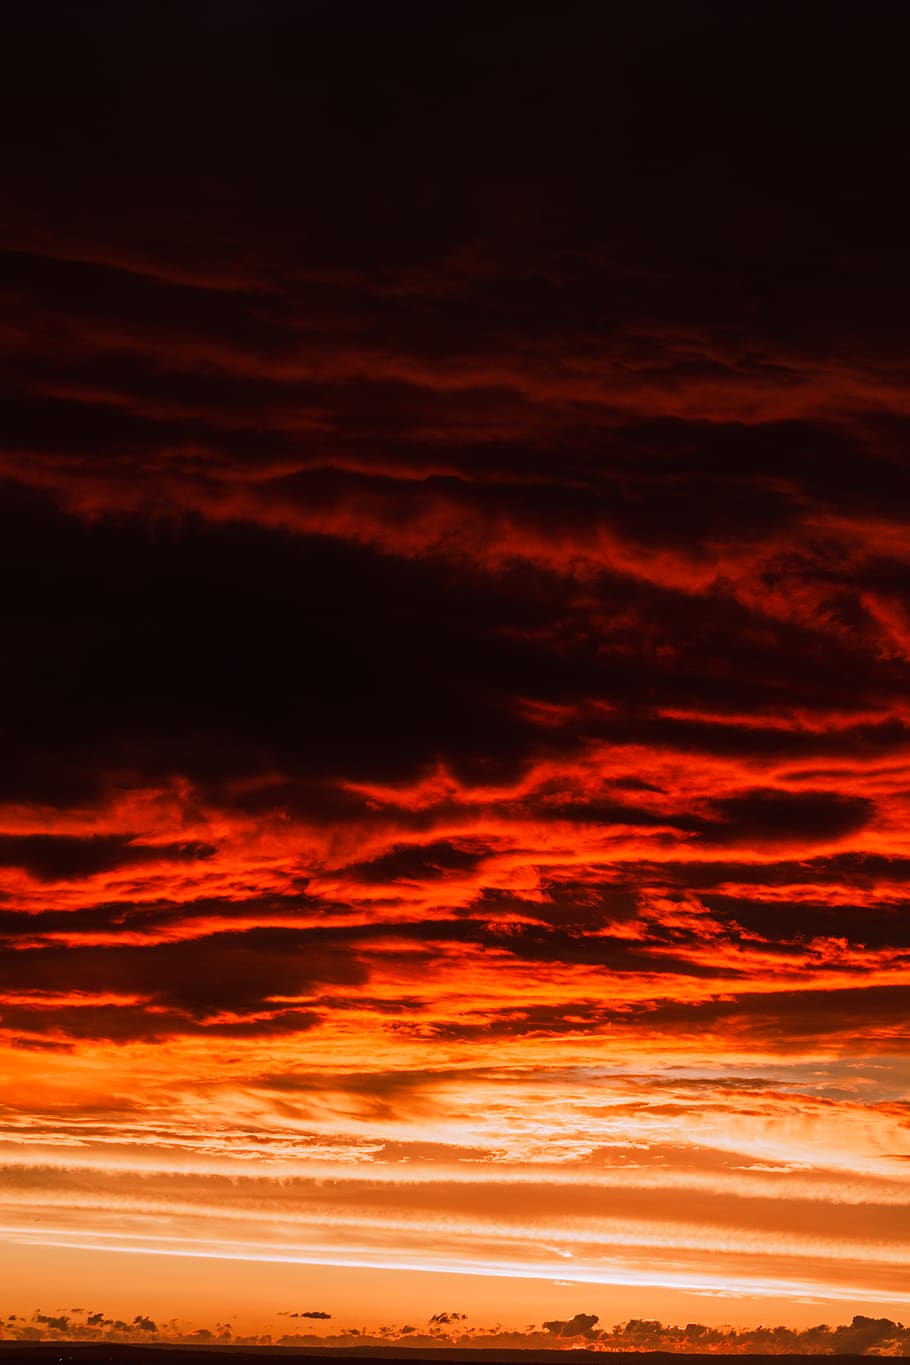 nature, outdoors, sunset, red sky, dawn, dusk, cloud, melbourne